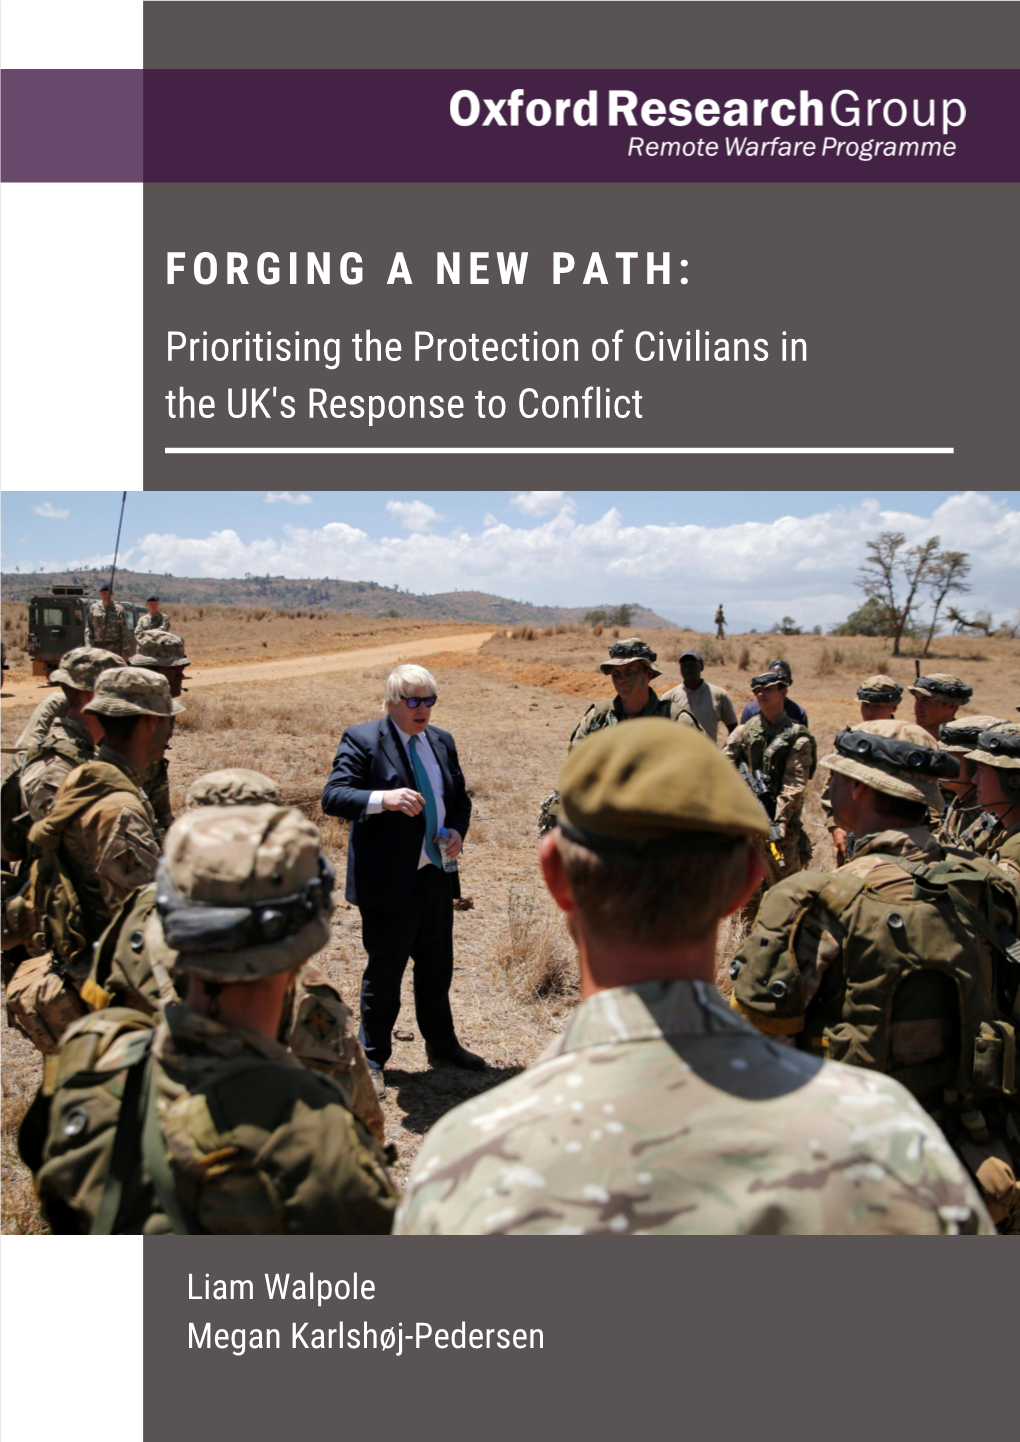 FORGING a NEW PATH: Prioritising the Protection of Civilians in the UK's Response to Conflict